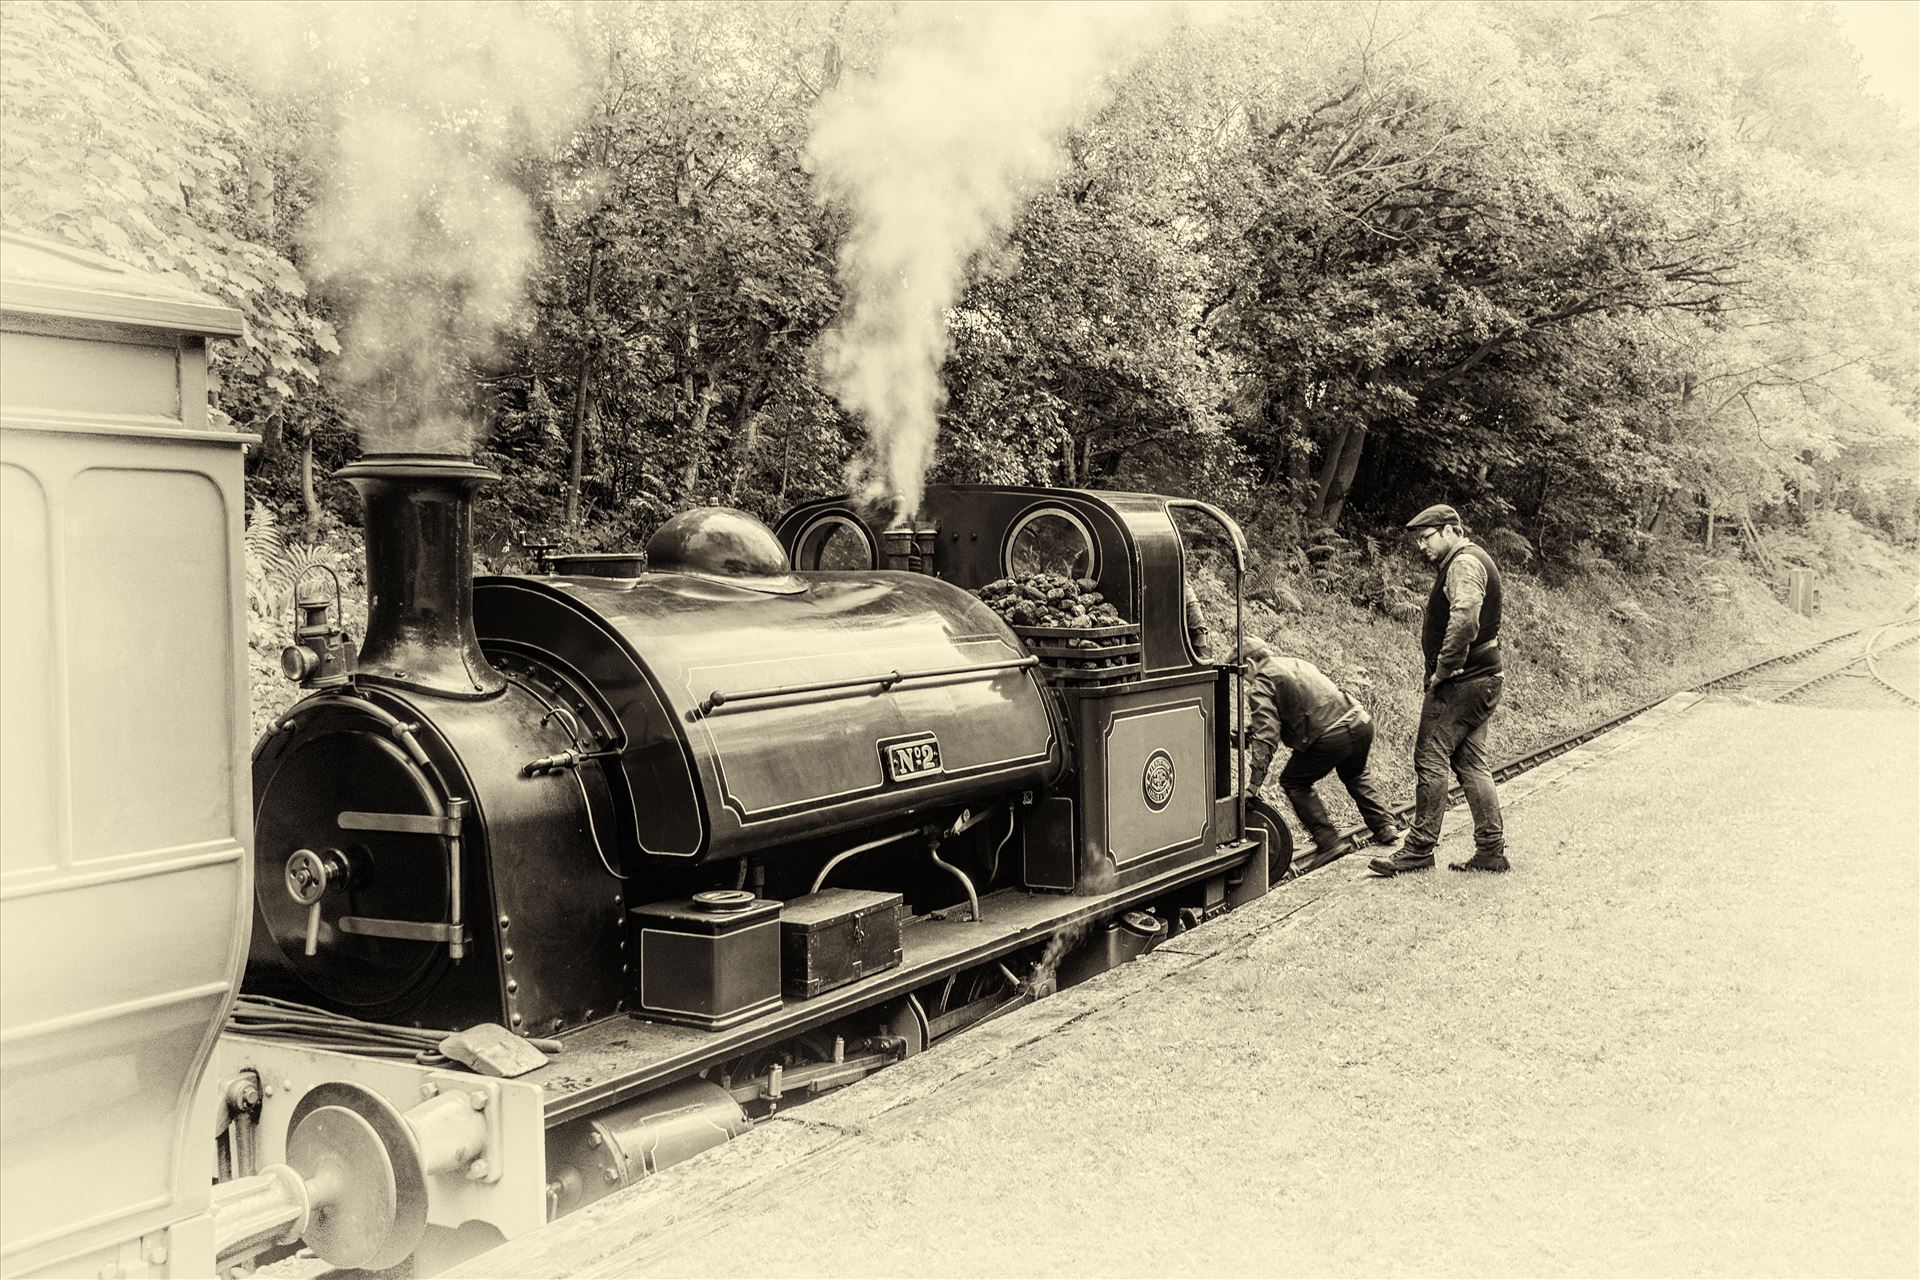 Steam train at Tanfield railway -  by philreay